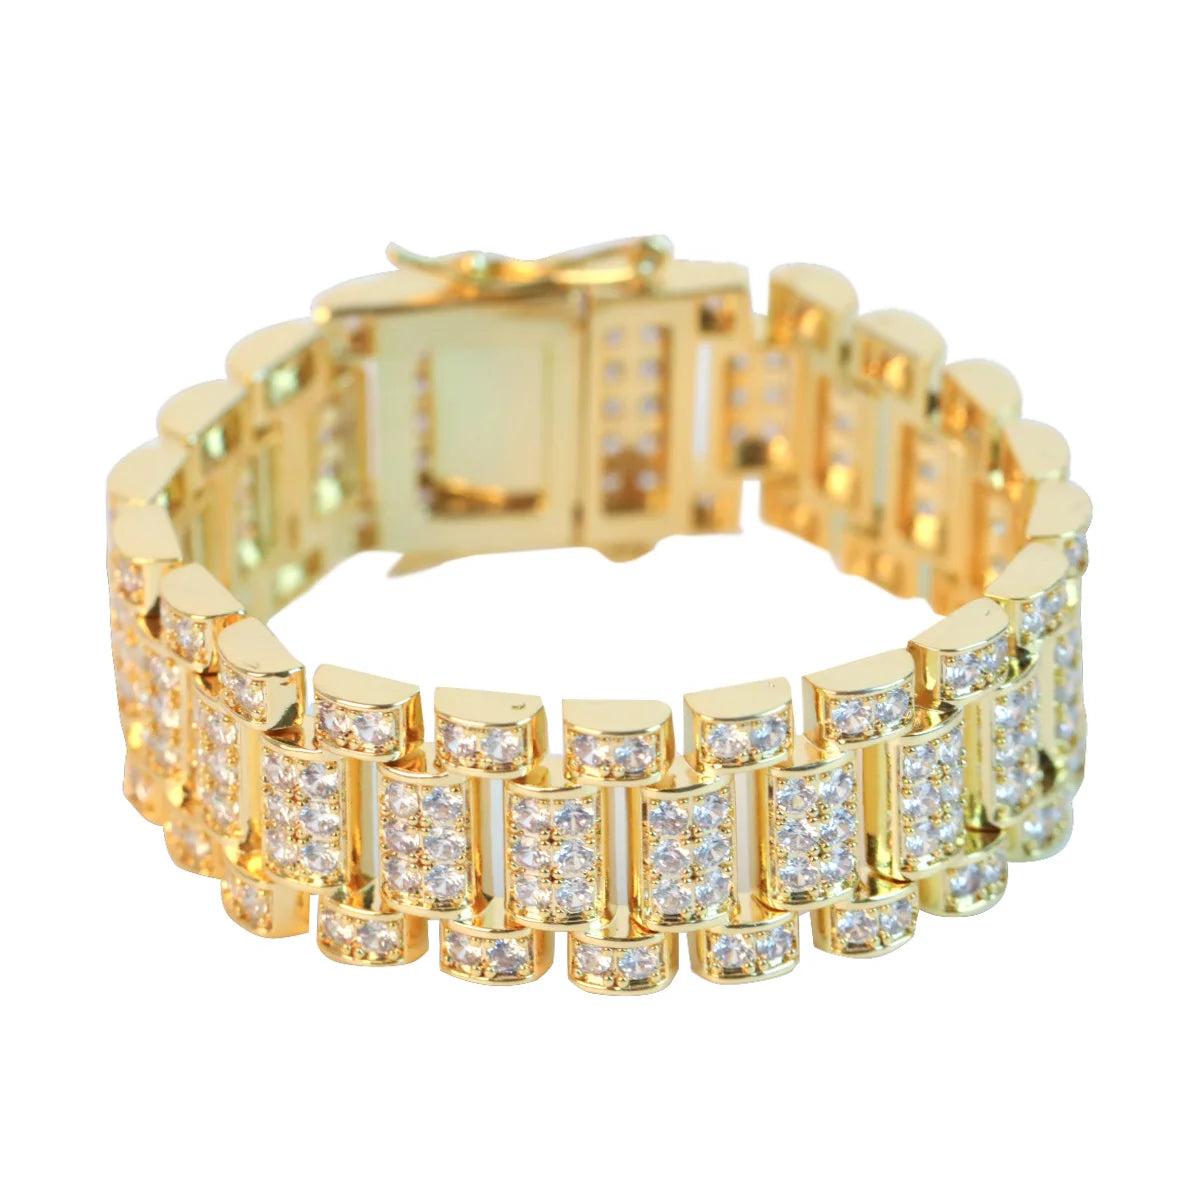 IceBox DC: Unisex 3A+ CZ Iced Out Link Bracelet/Necklace (Gold or Silver Plated)